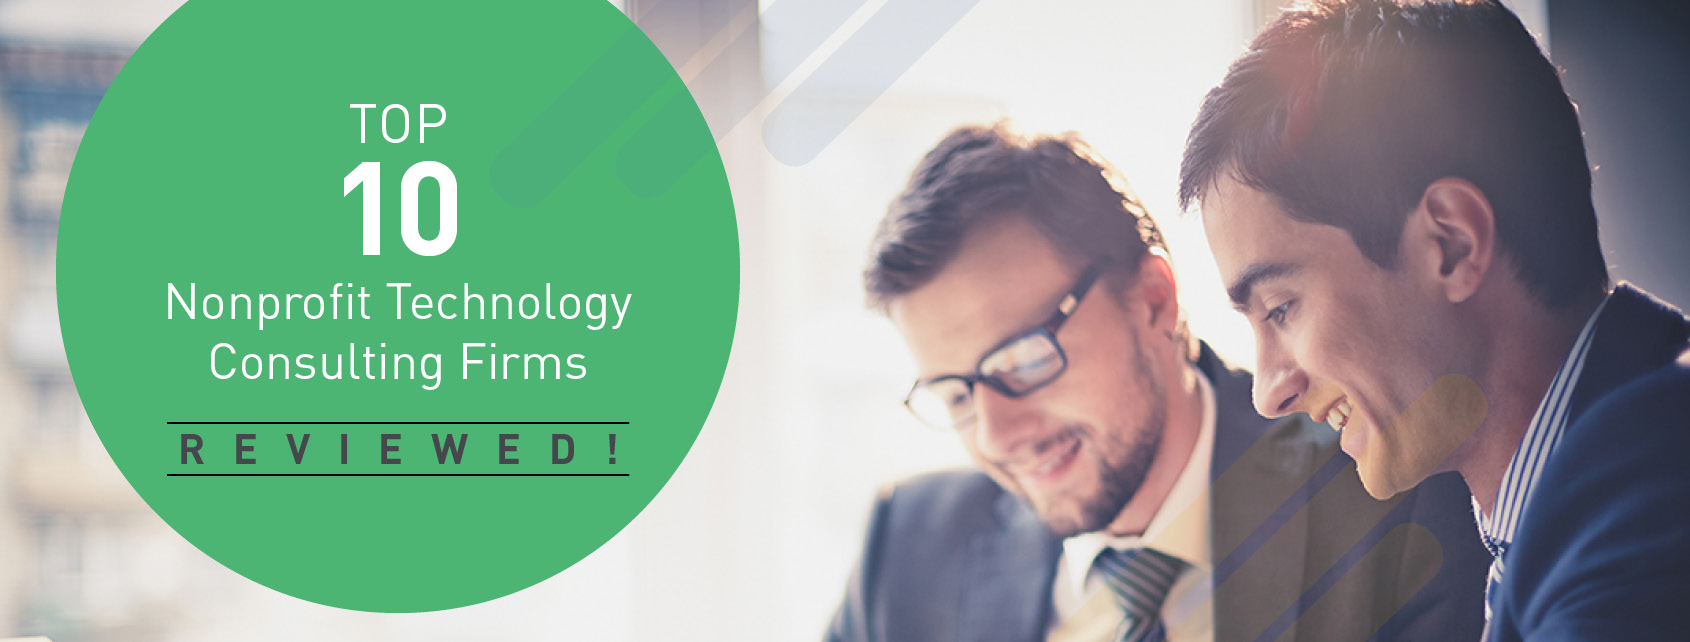 Read our recommendations for the top nonprofit technology consulting firms in this article.